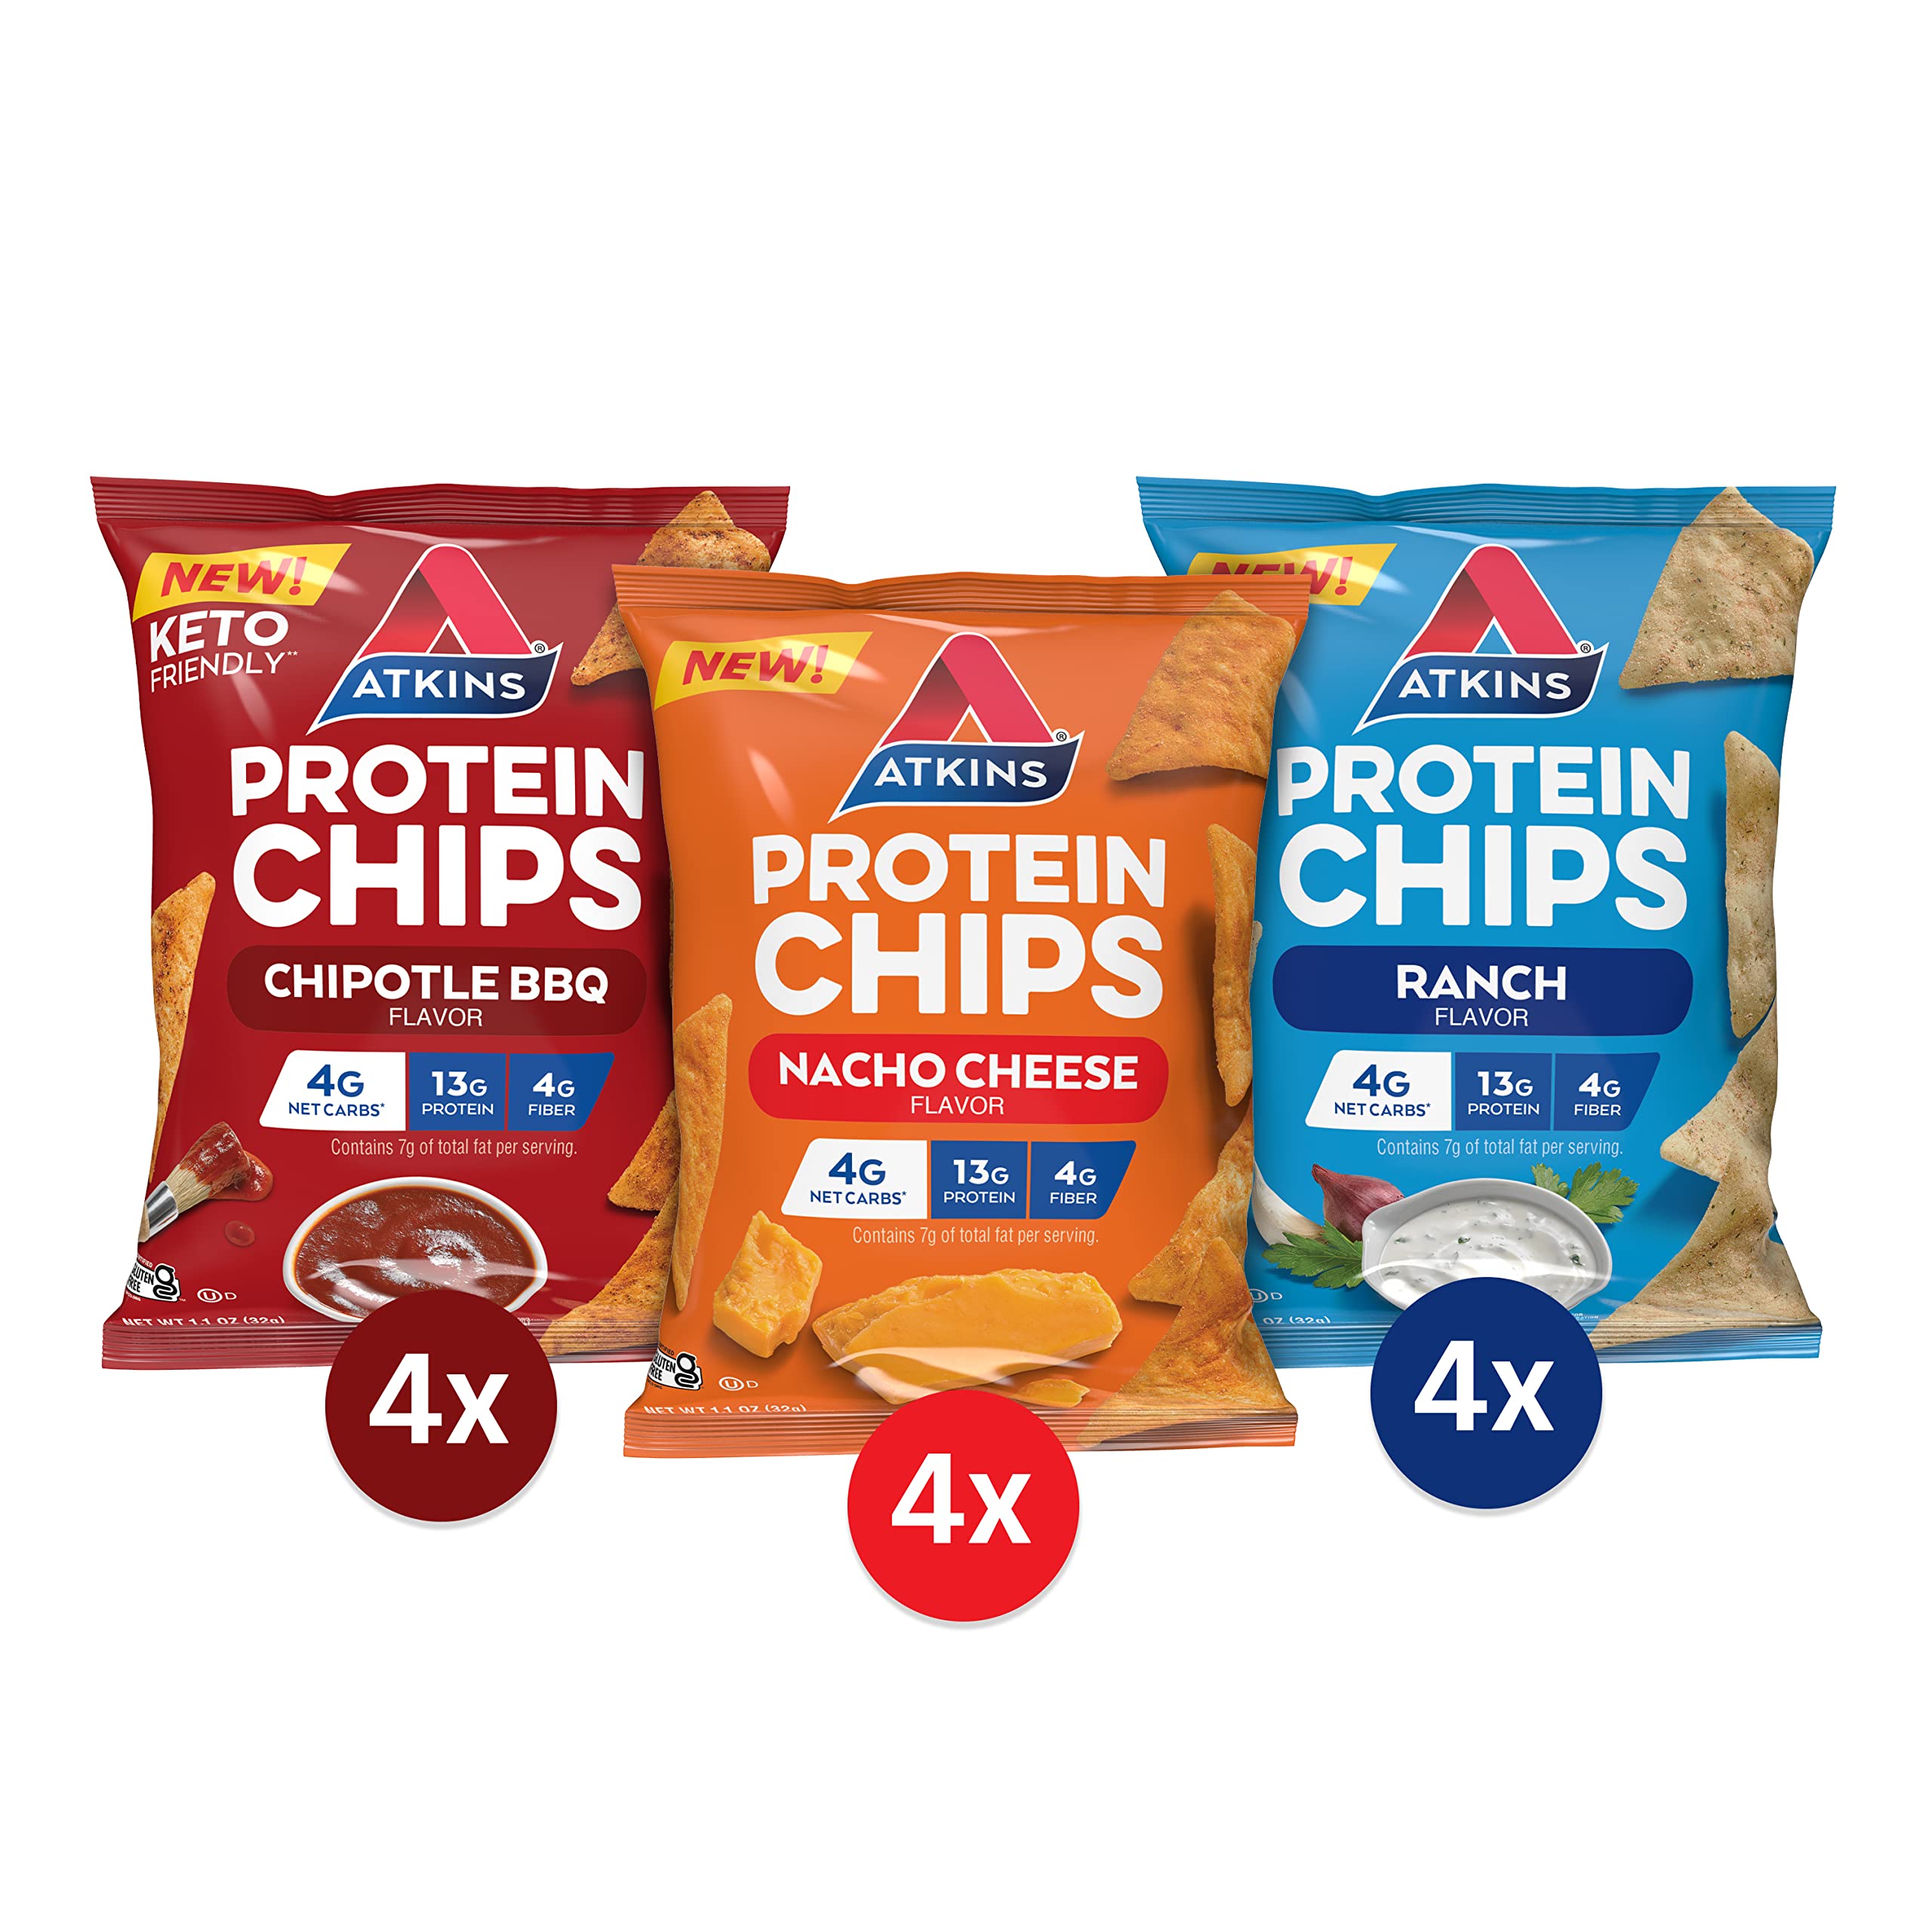 Atkins Protein Chips Variety Pack, 4g Net Carbs, 13g Protein, Gluten Free, Low Glycemic, 12 Count & Double Chocolate Chip Protein Cookie, Protein Dessert, Rich in Fiber, 3g Net Carbs, 1g Sugar